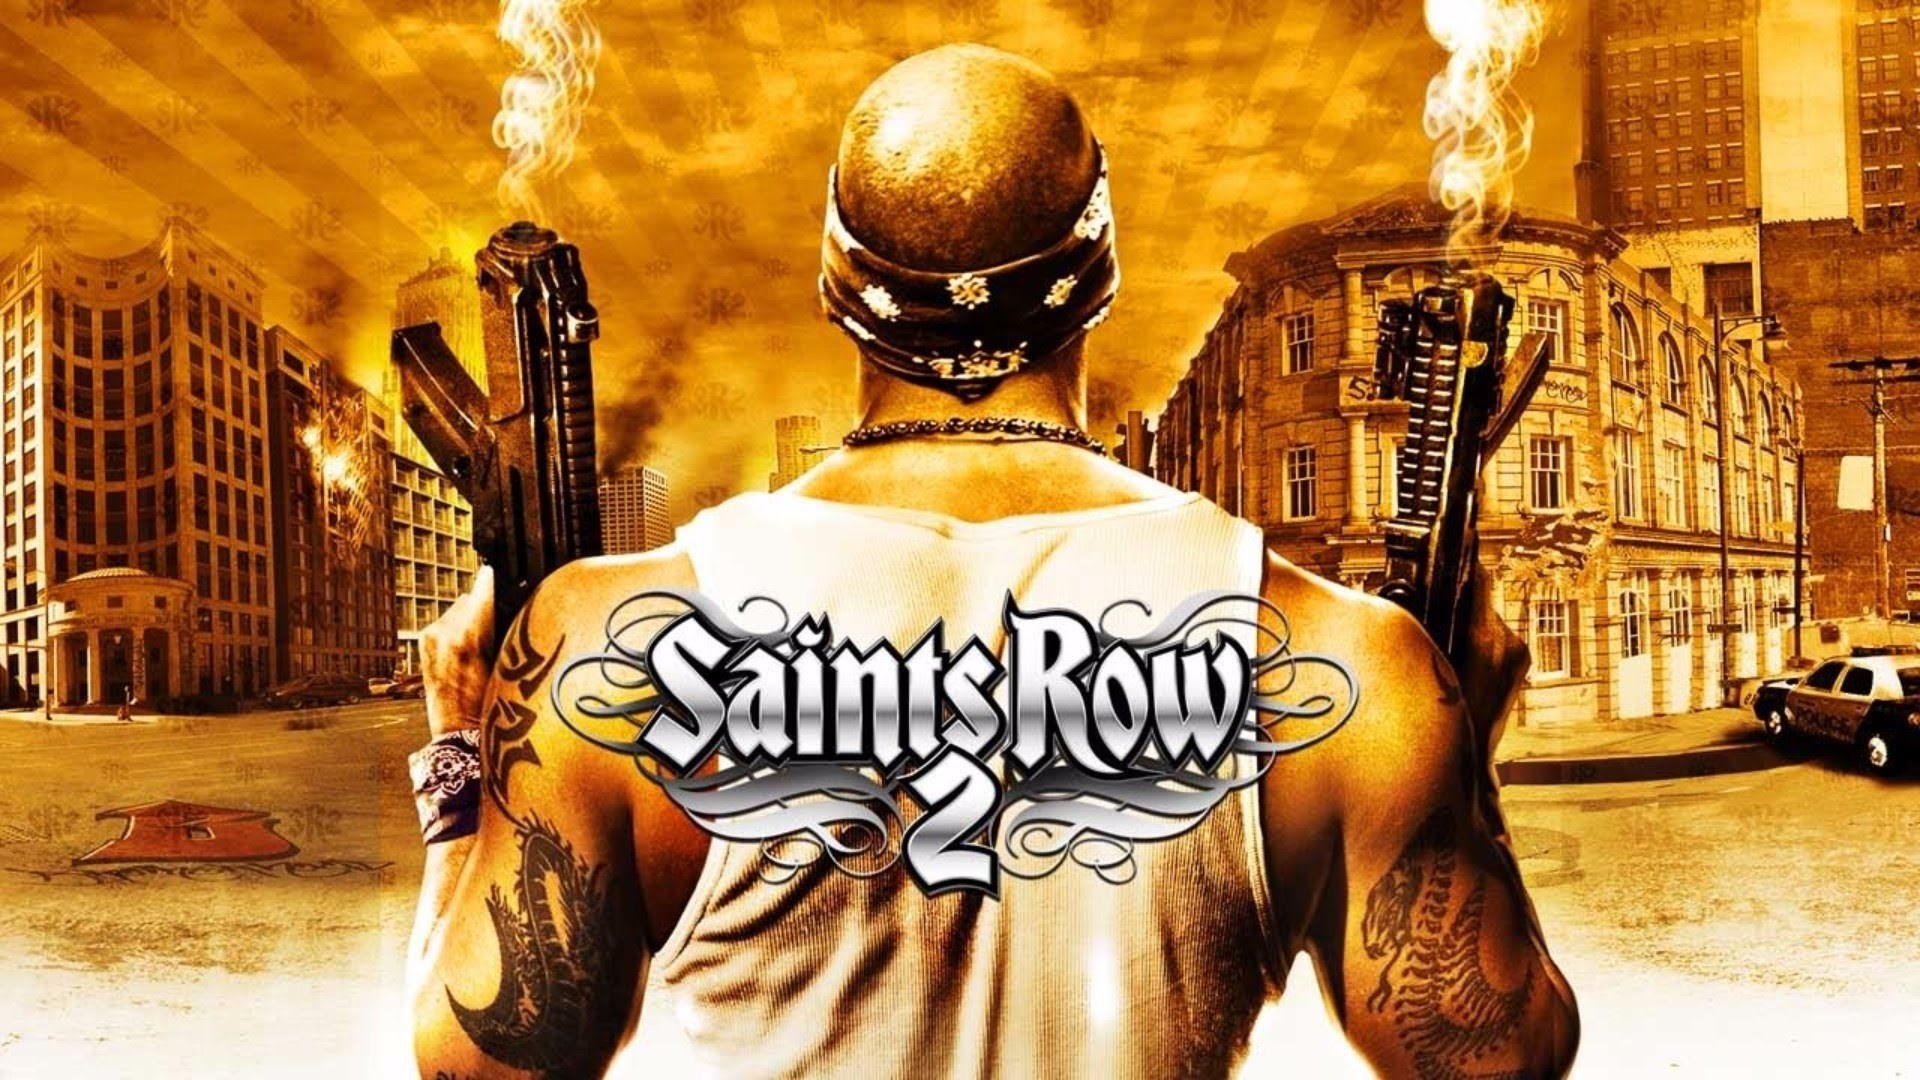 What Exactly Made Saints Row 2 Stand Out?